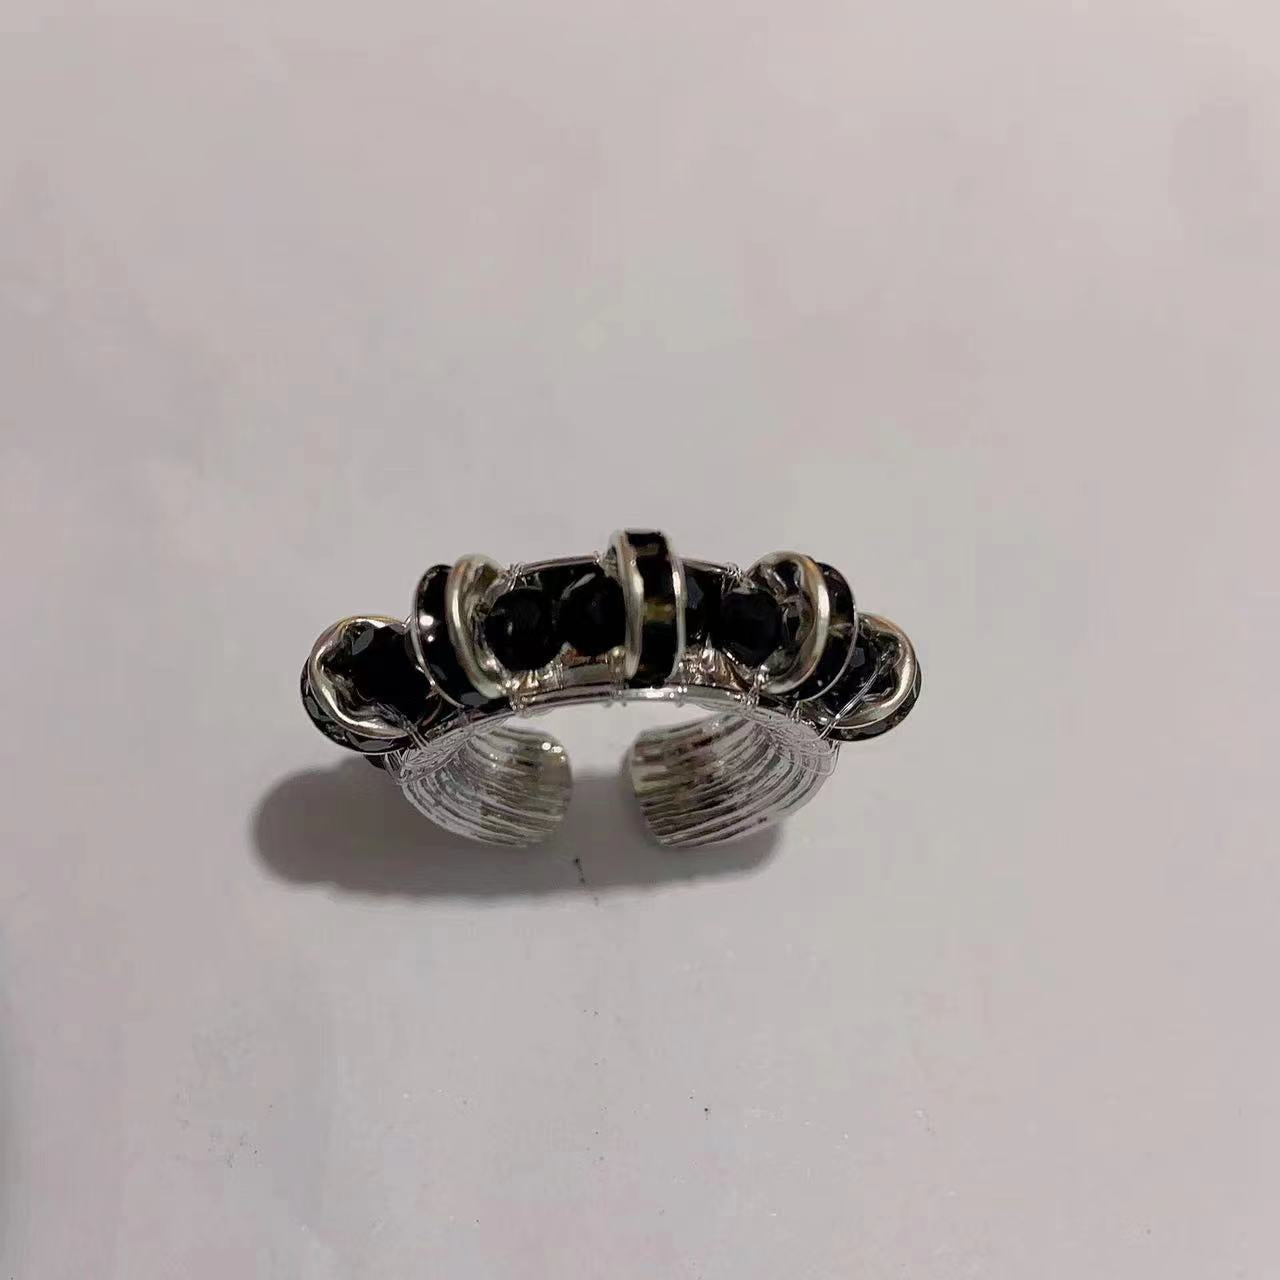 Original Black Poison Black Stone Ring with Small Design, Sweet and Cool Style, Simple and Advanced Sense, Personalized Ring for Male and Female Lovers